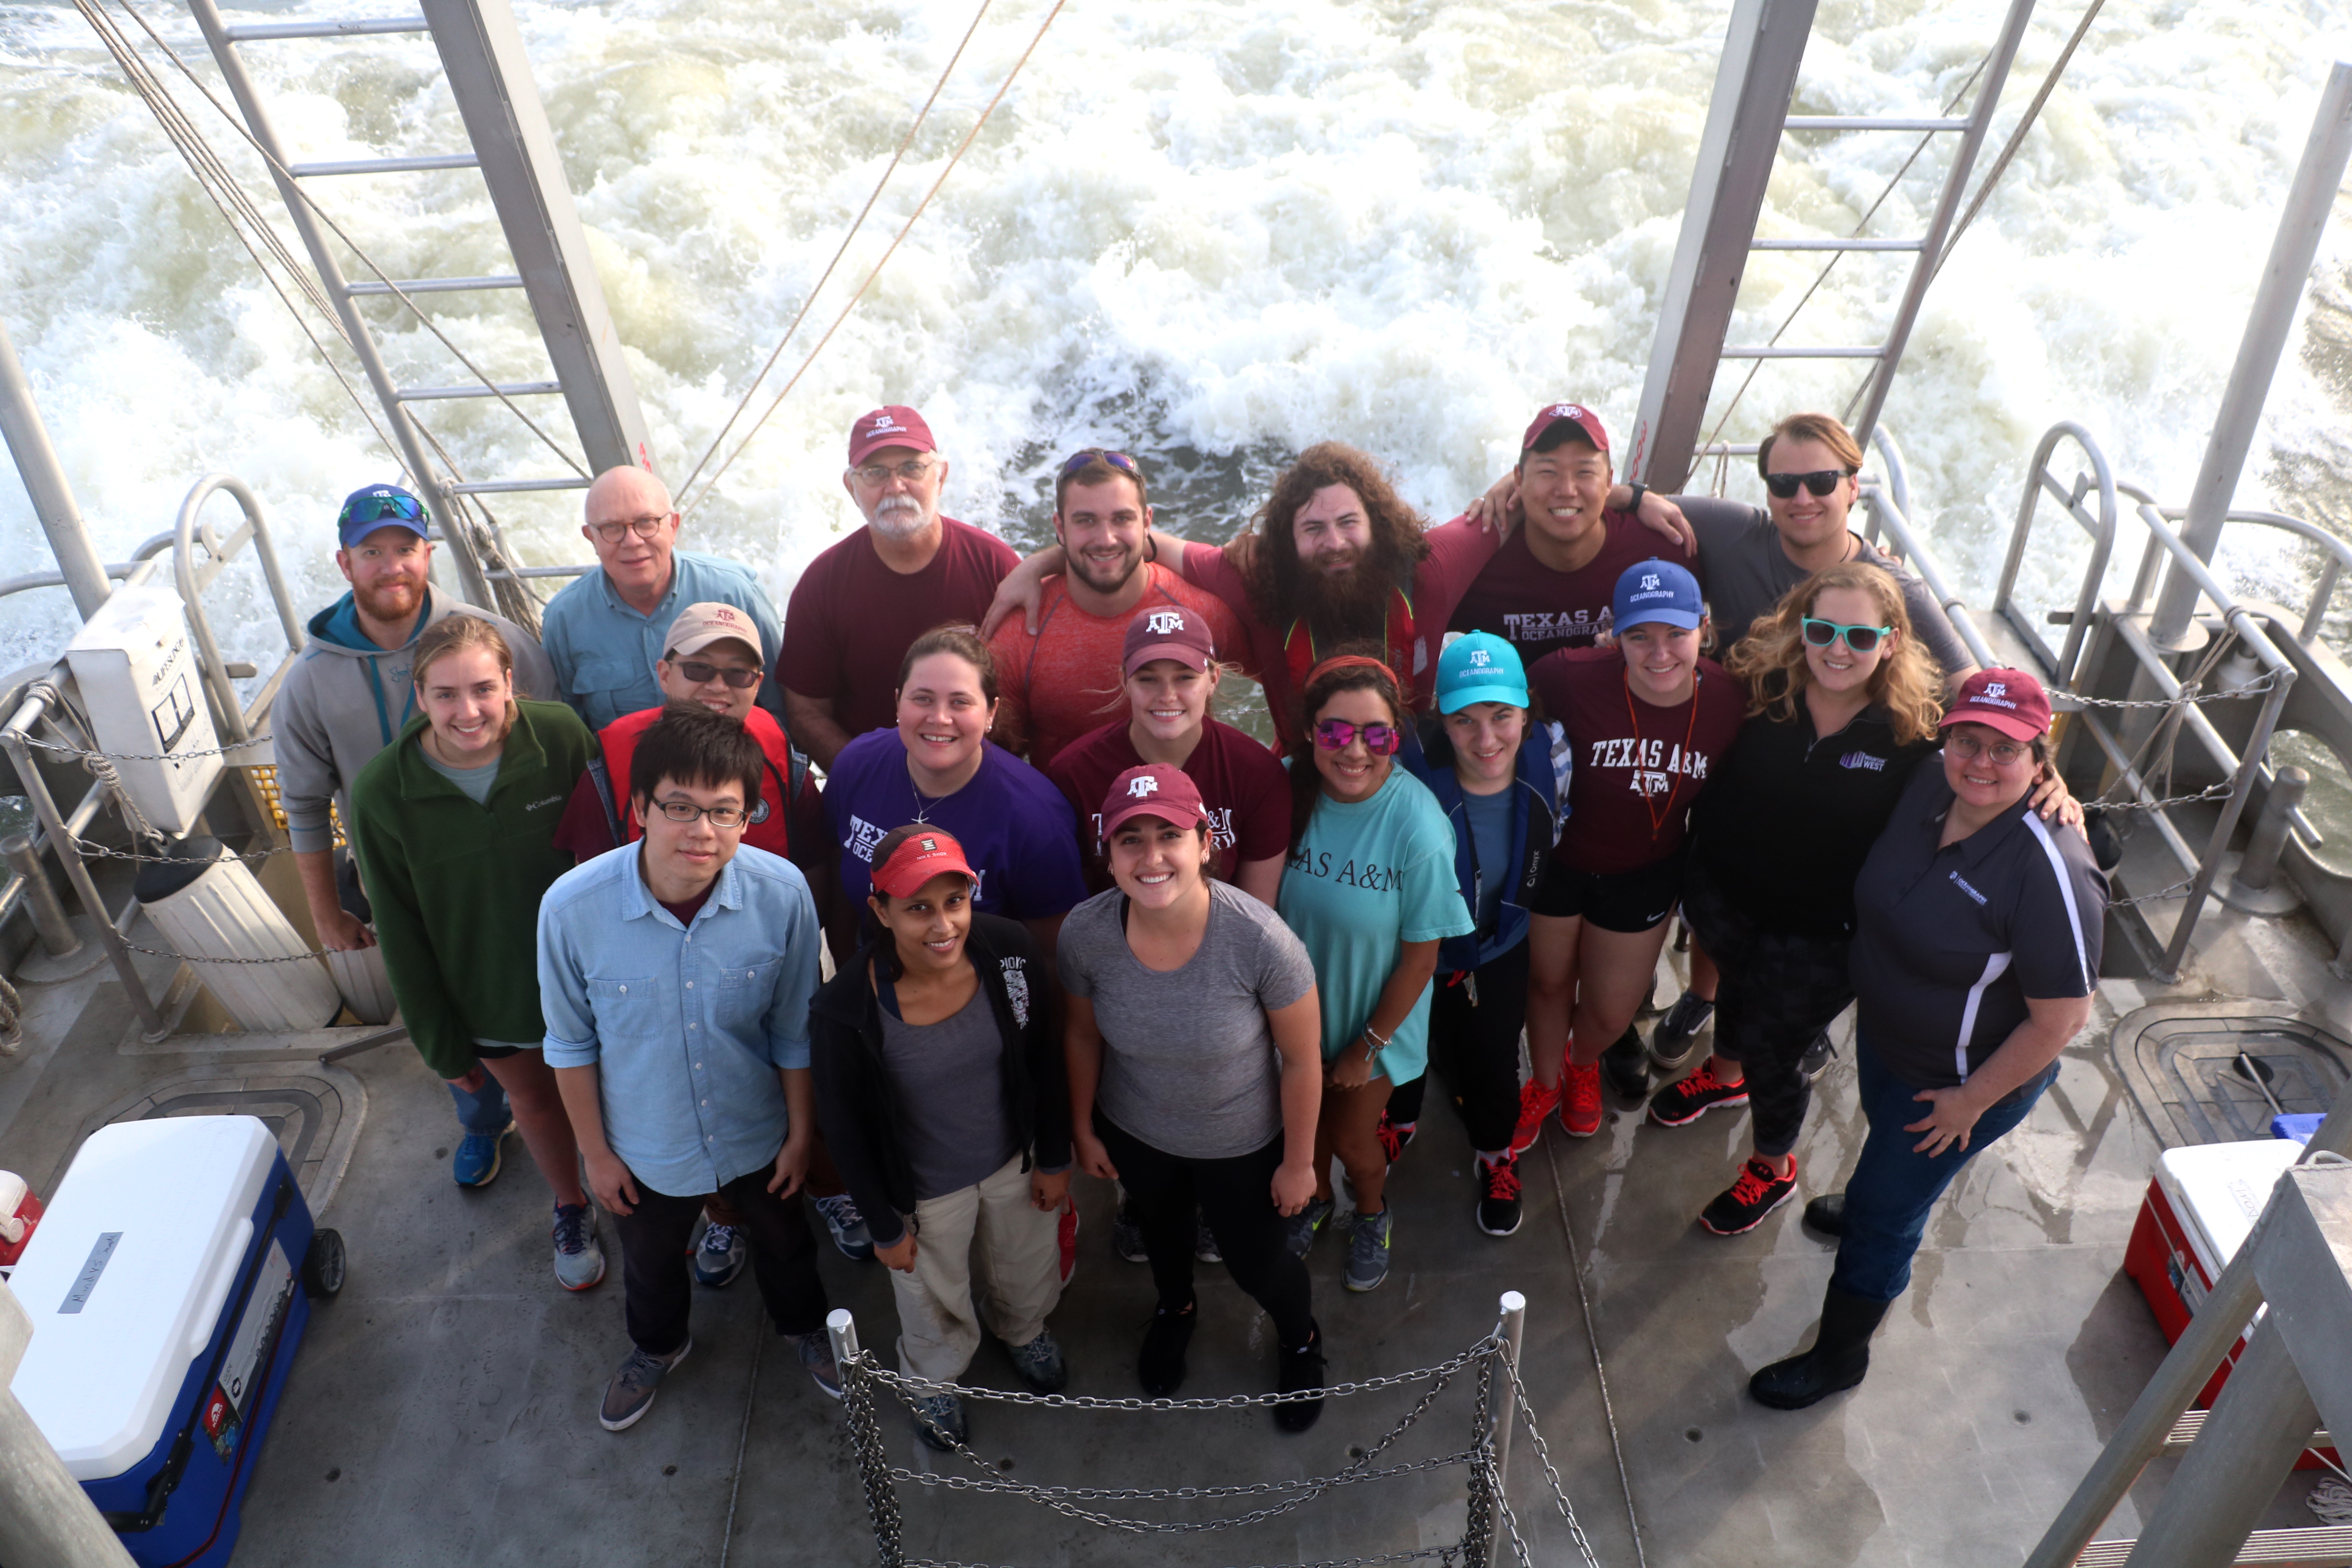 Group photo of all the researchers aboard on R/V Trident on March 24. (Photo by: Chris Mouchyn)